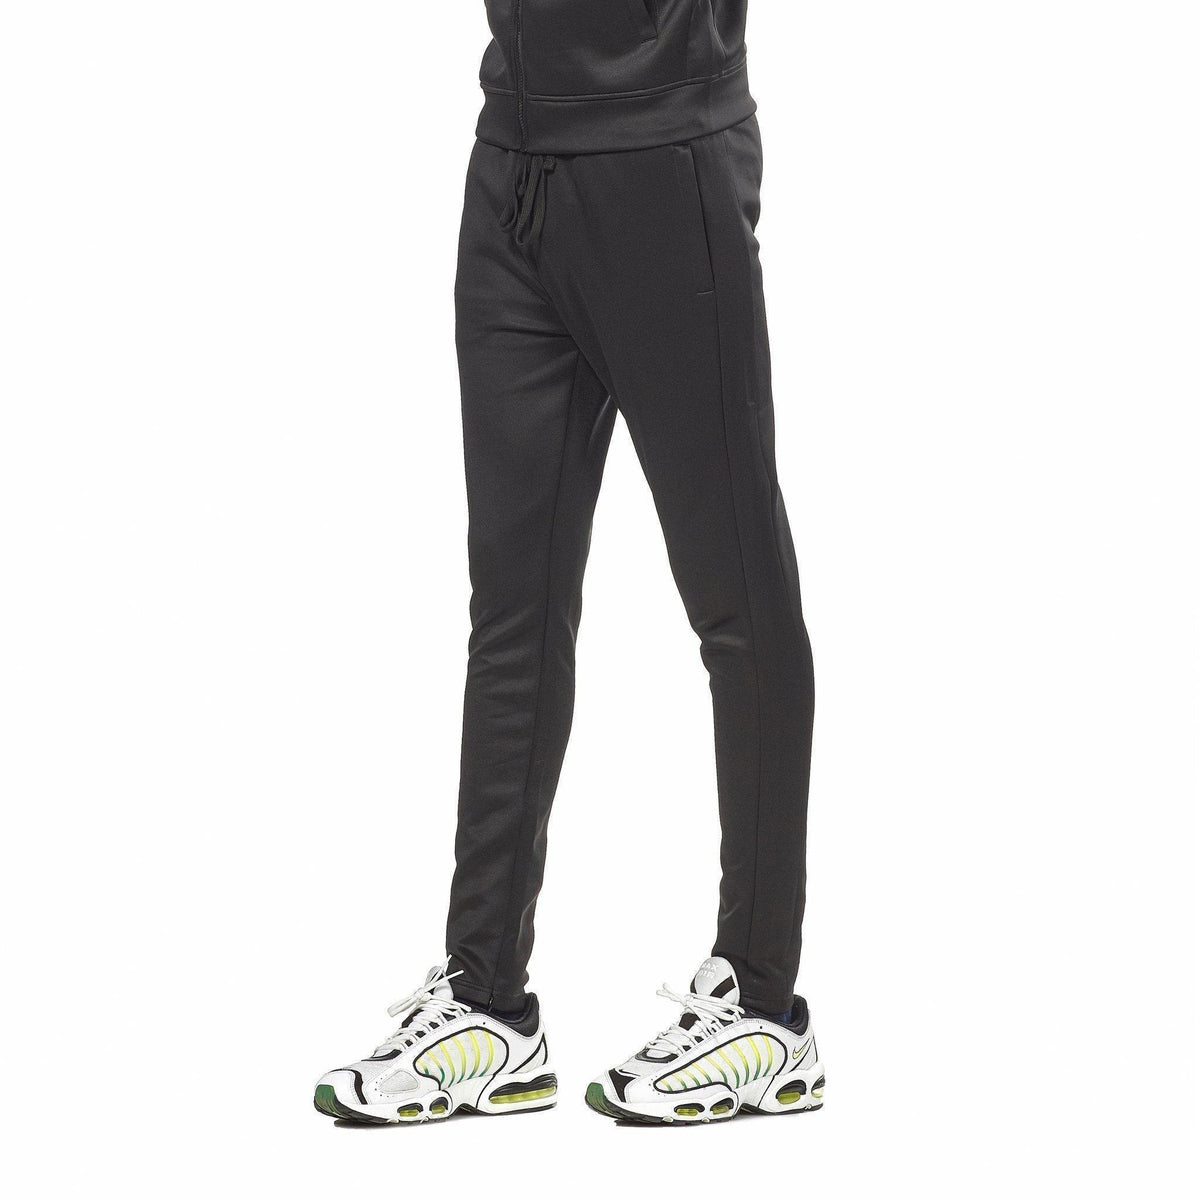 Black Track Pants - Fitted Joggers - Rebel Minds